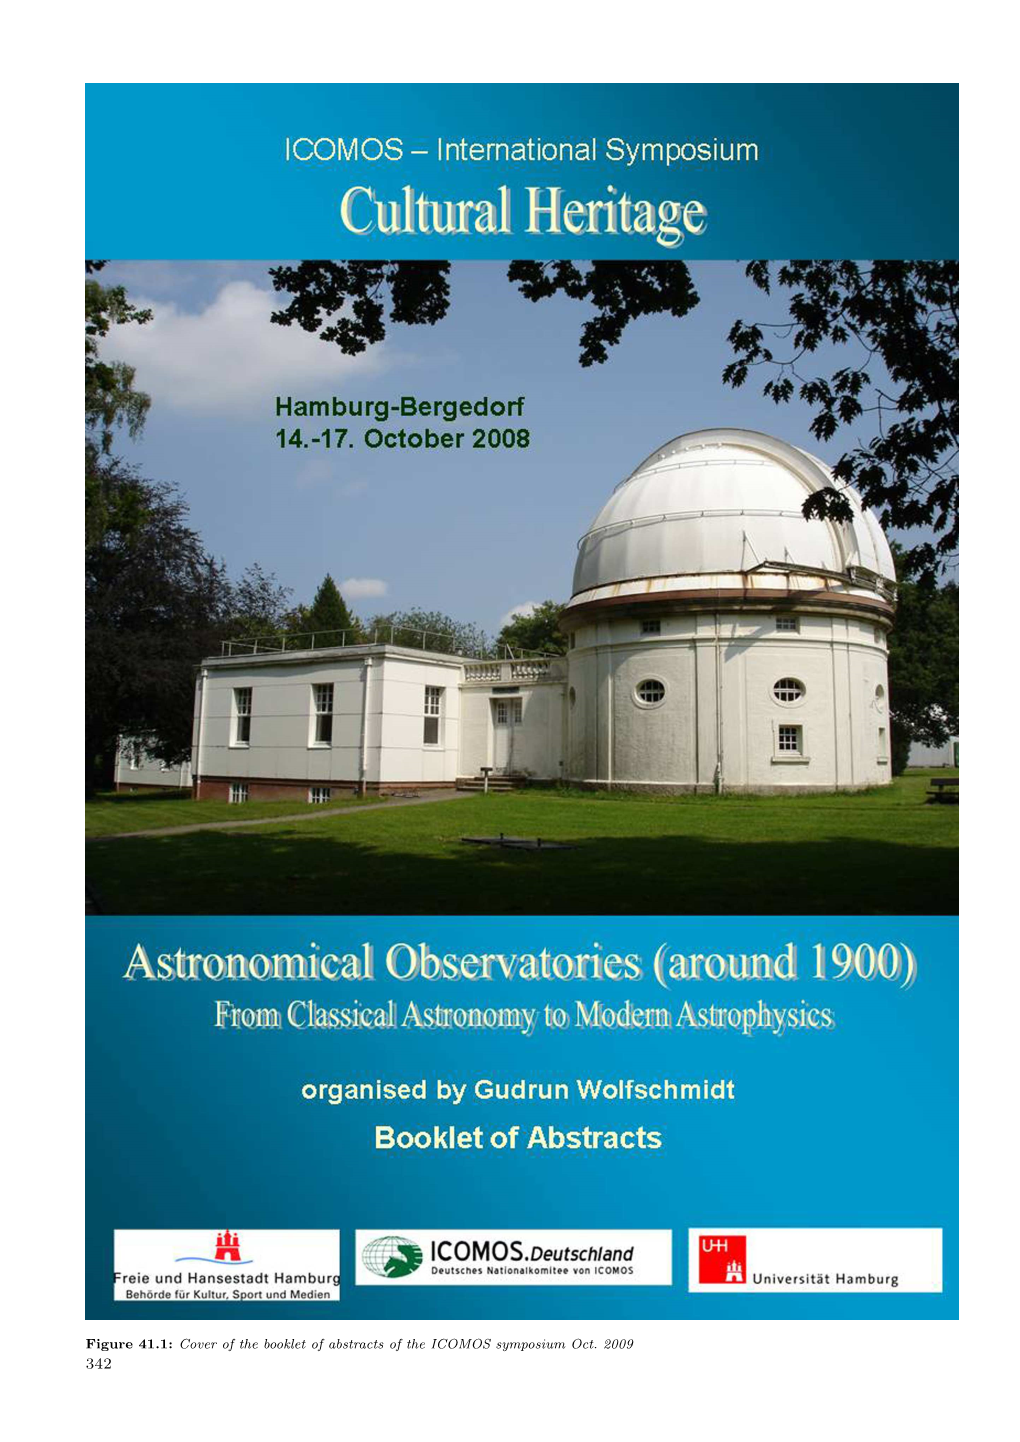 Cover of the Booklet of Abstracts of the ICOMOS Symposium Oct. 2009 342 Programme of the Symposium: Cultural Heritage of Observatories